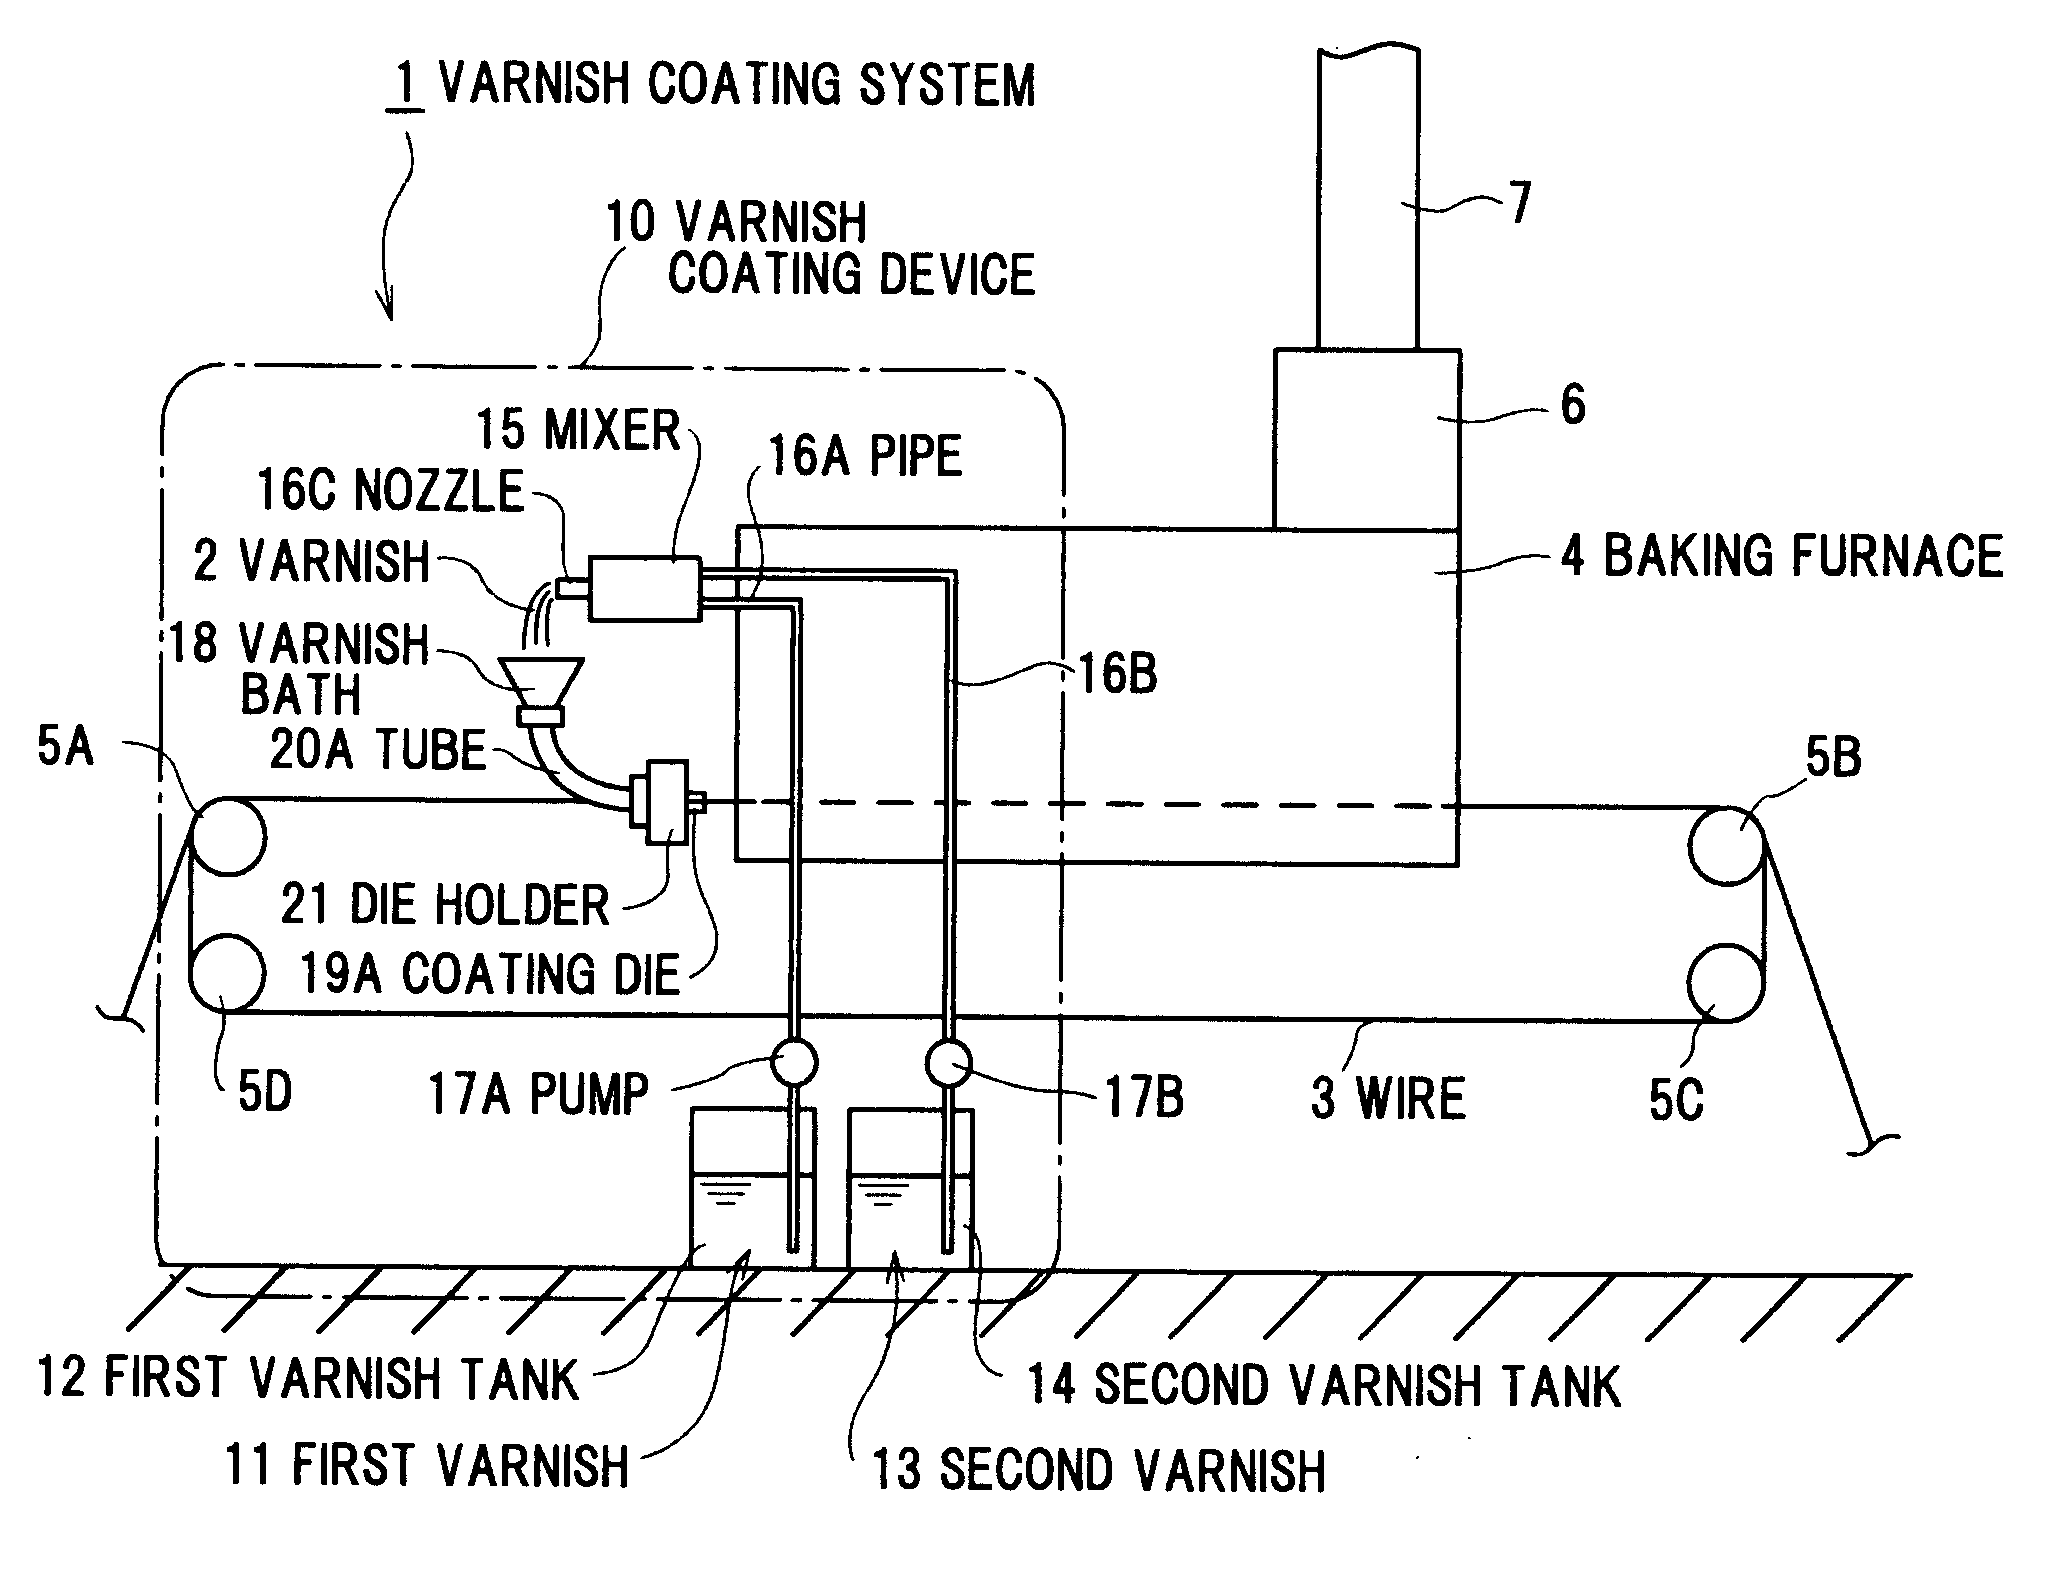 Varnish coating device and method for coating a varnish